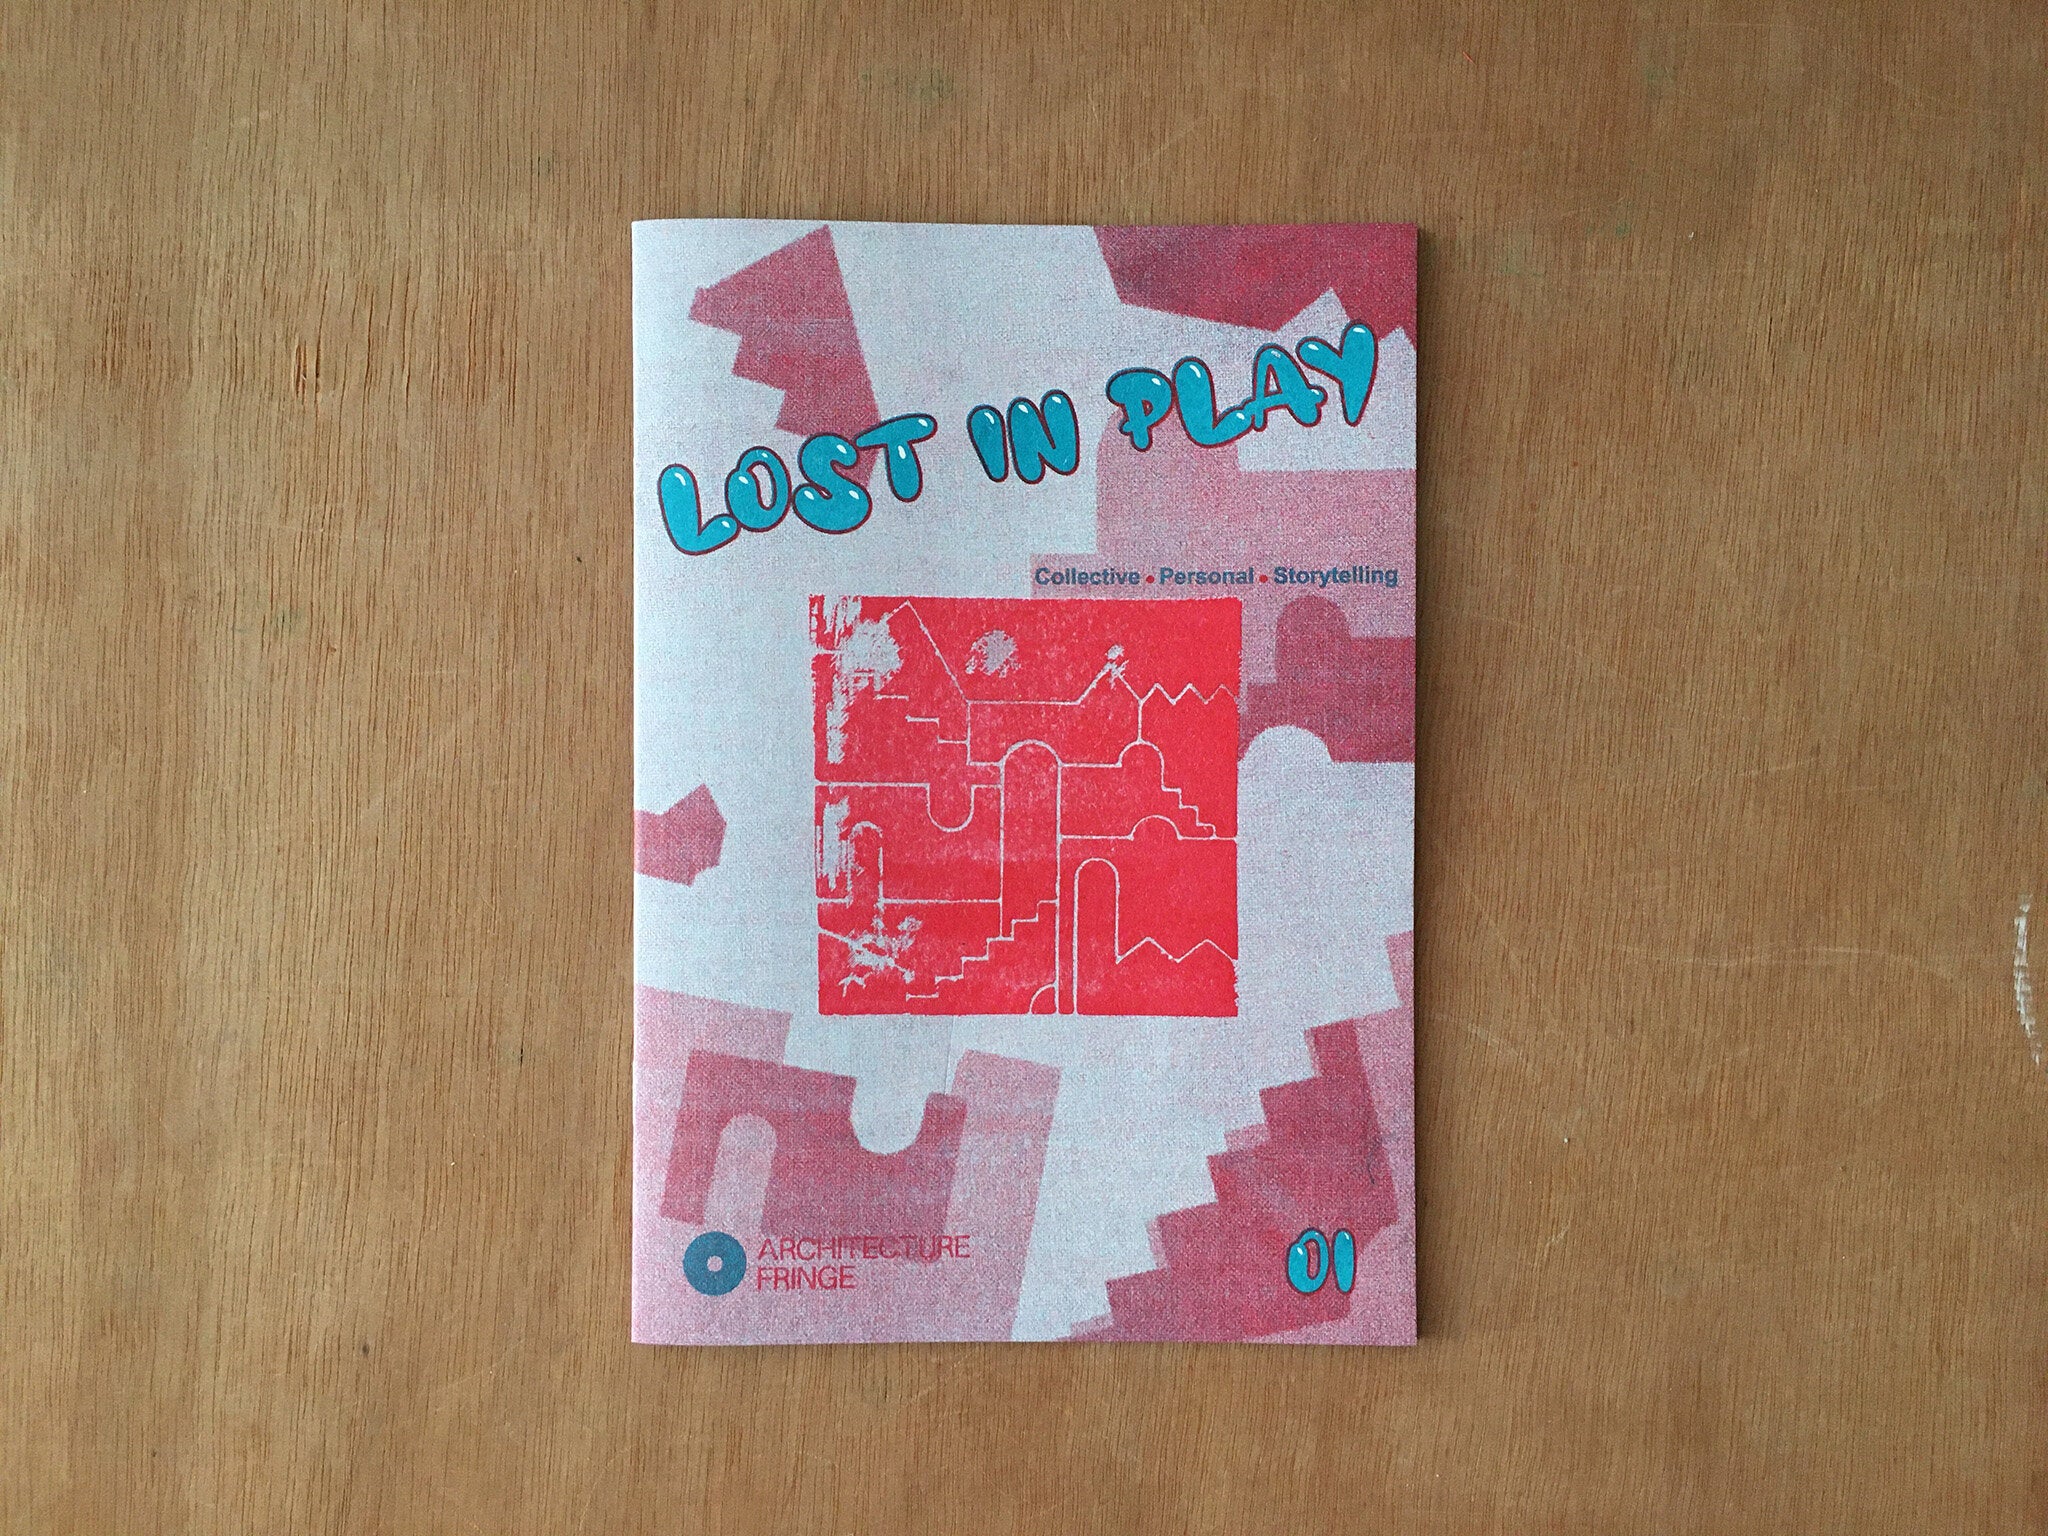 LOST IN PLAY: COLLECTIVE PERSONAL STORYTELLING by Nooma Studio